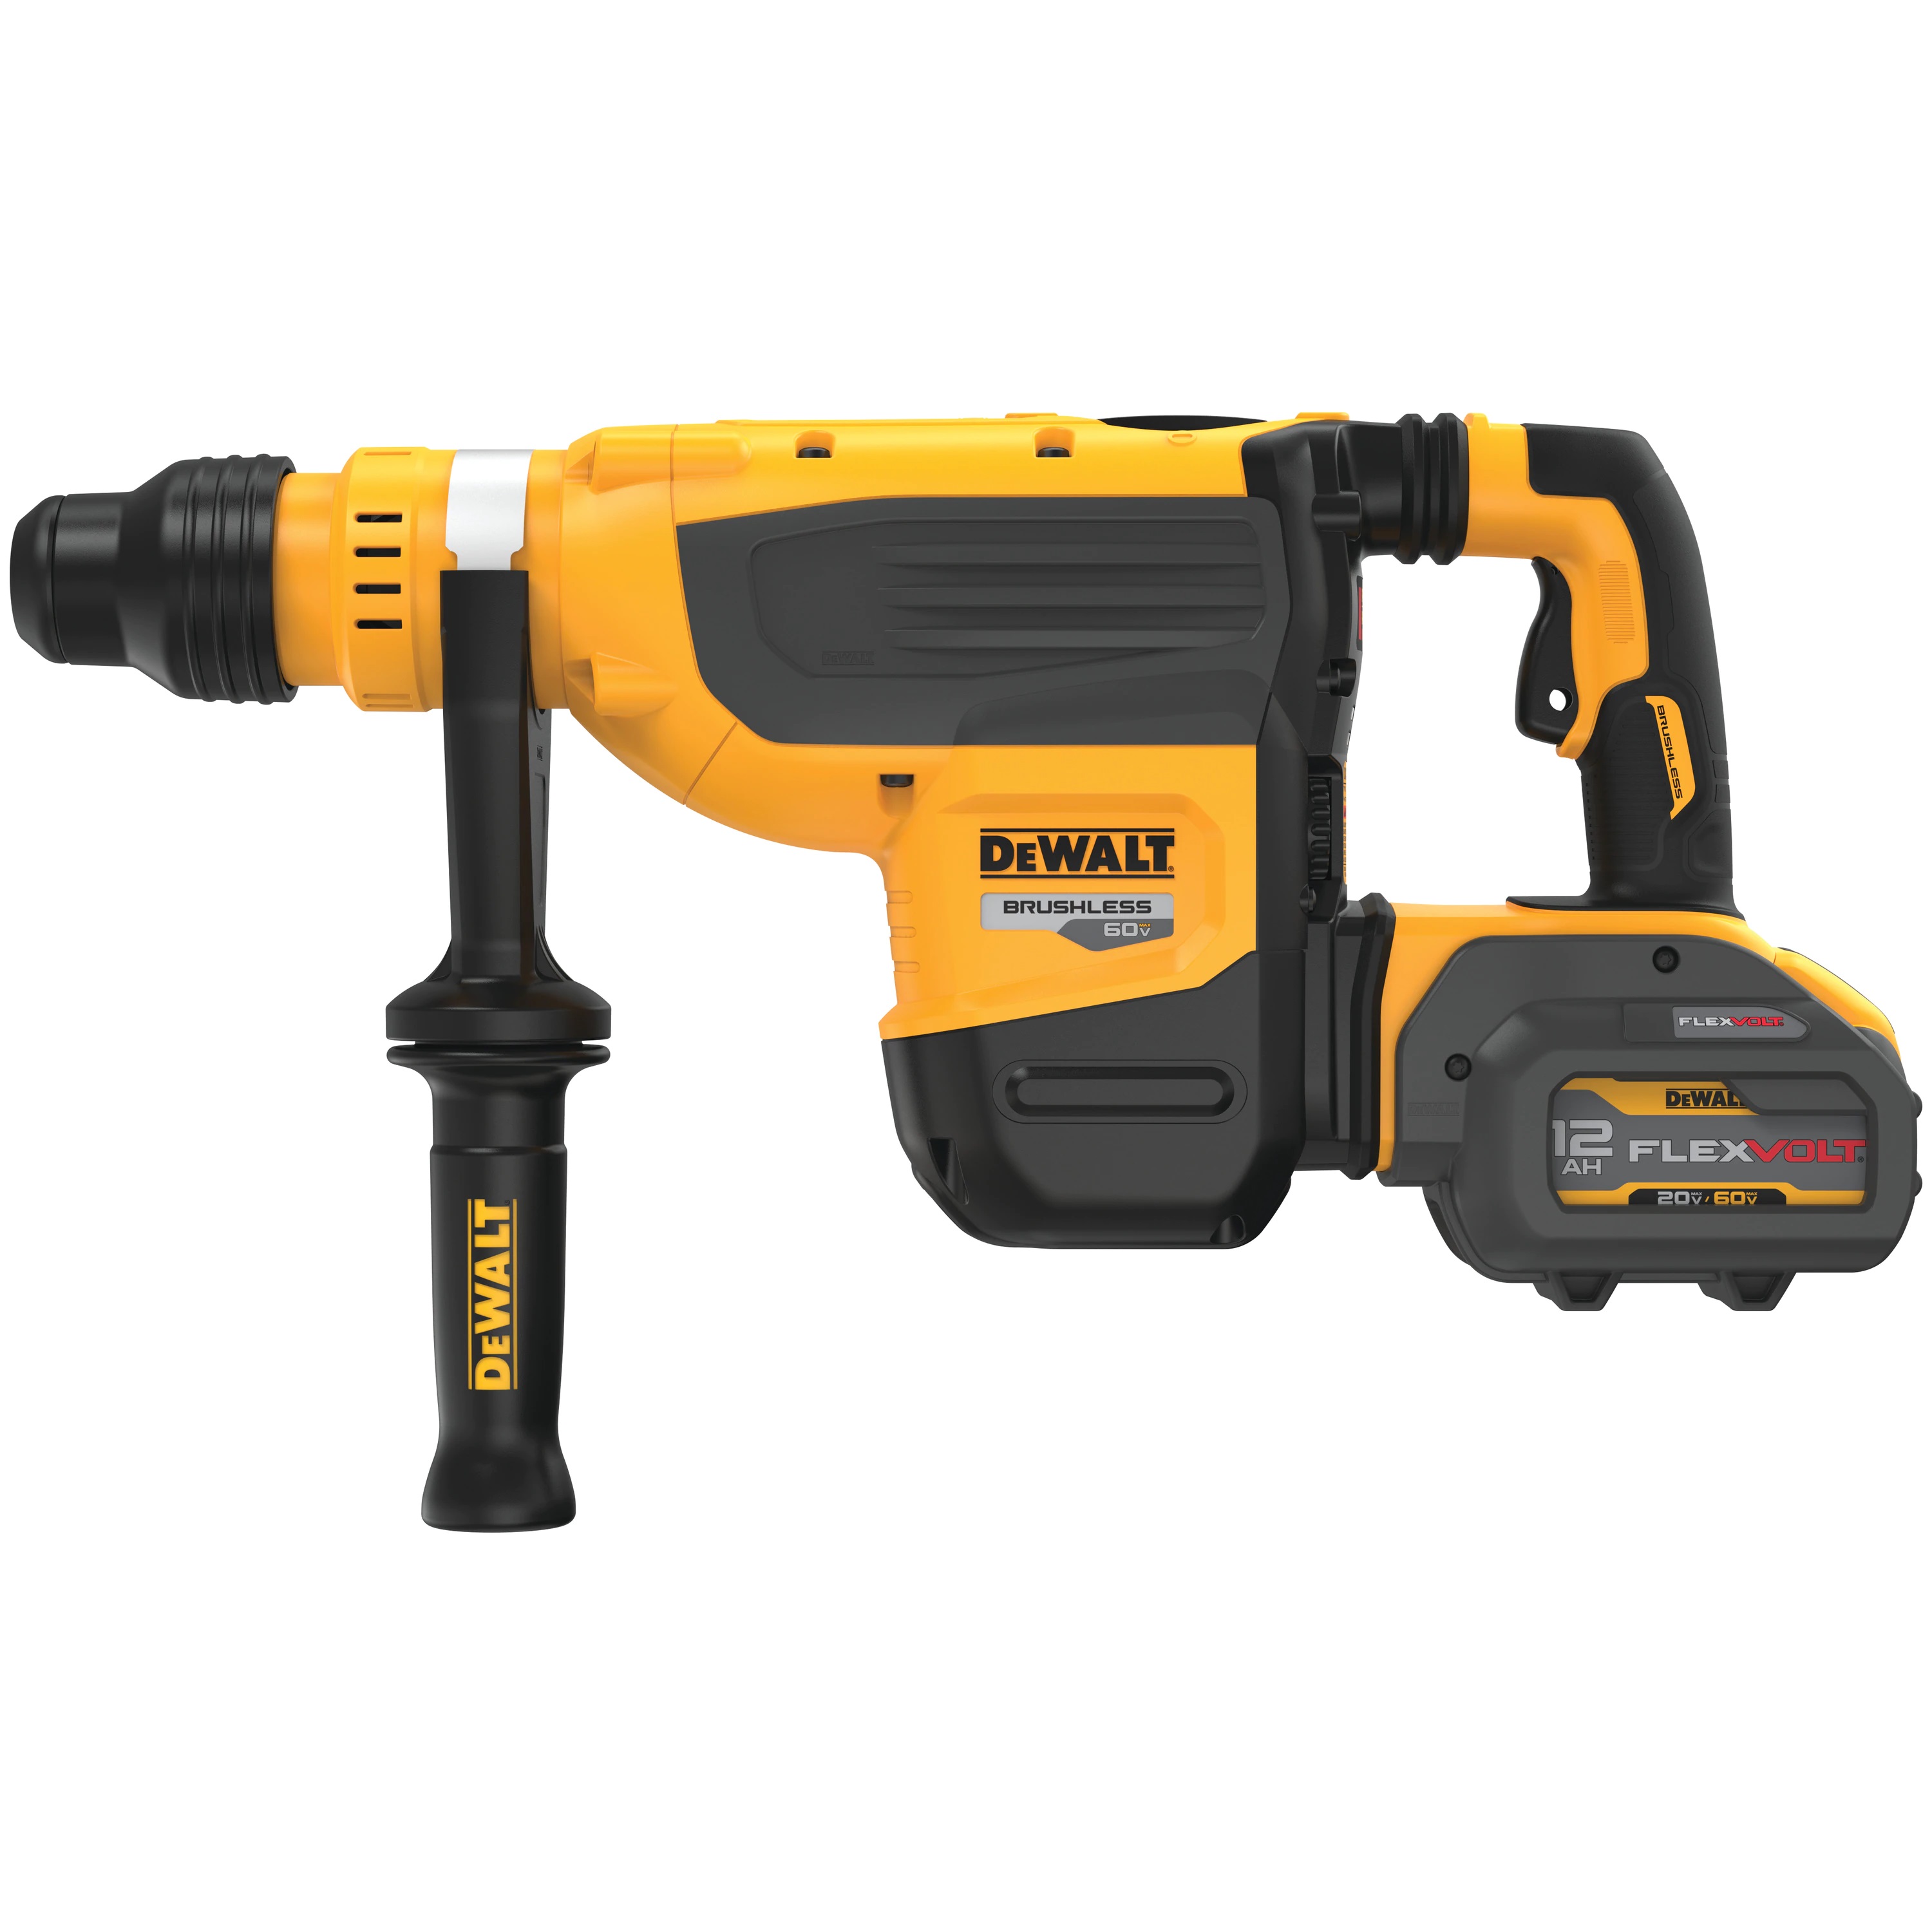 Hammer Drill 60V MAX* 17/8 IN. Brushless Cordless SDS Max (TOOL ONLY